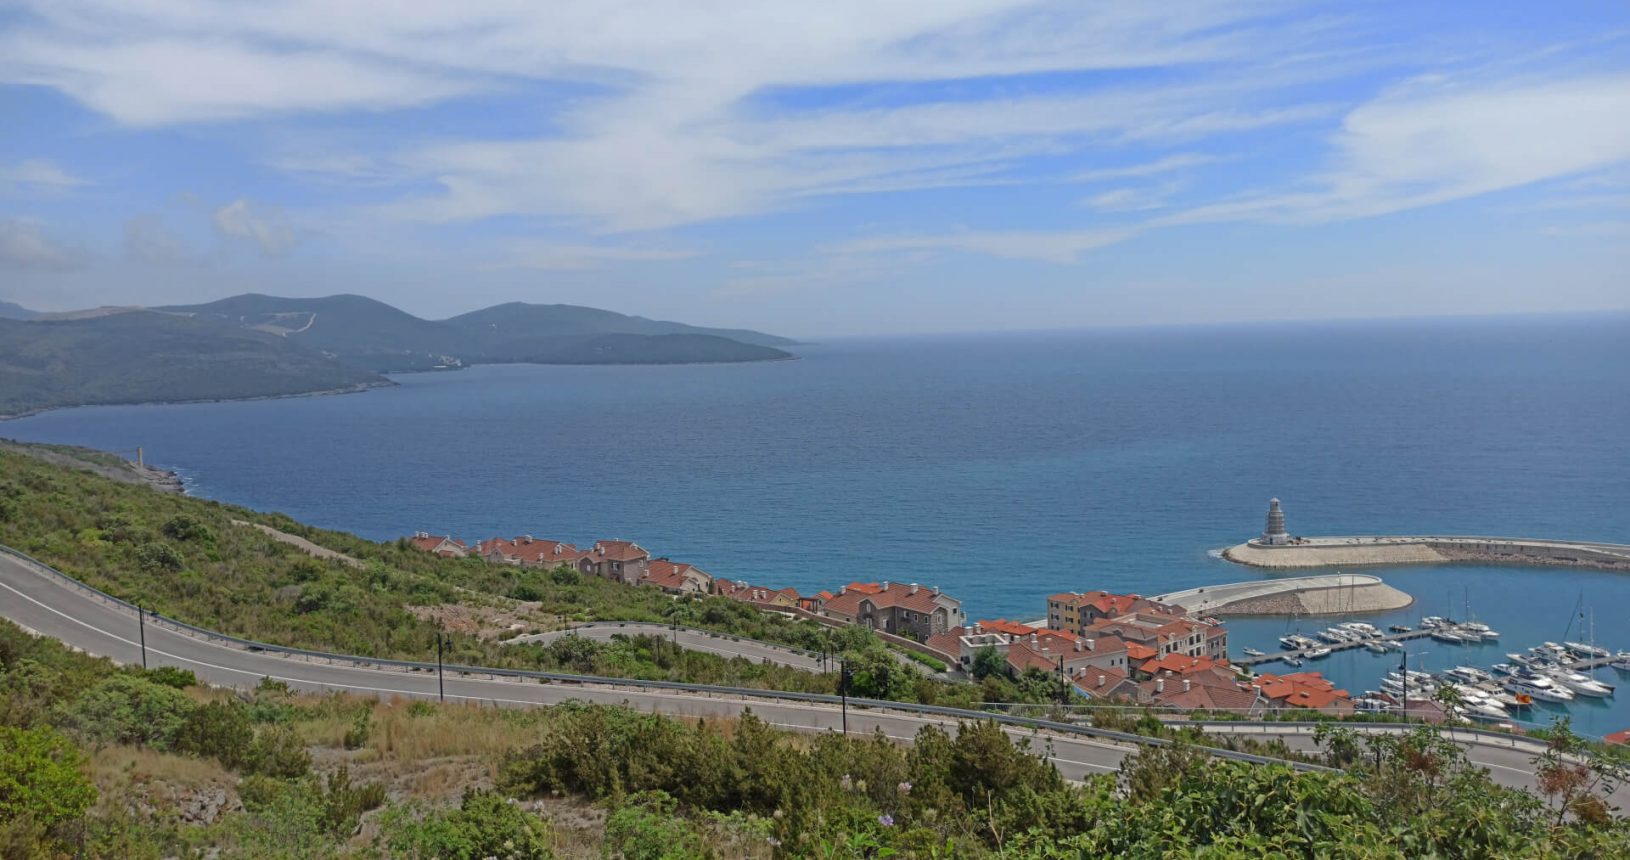 The view to Lustica Bay from the top